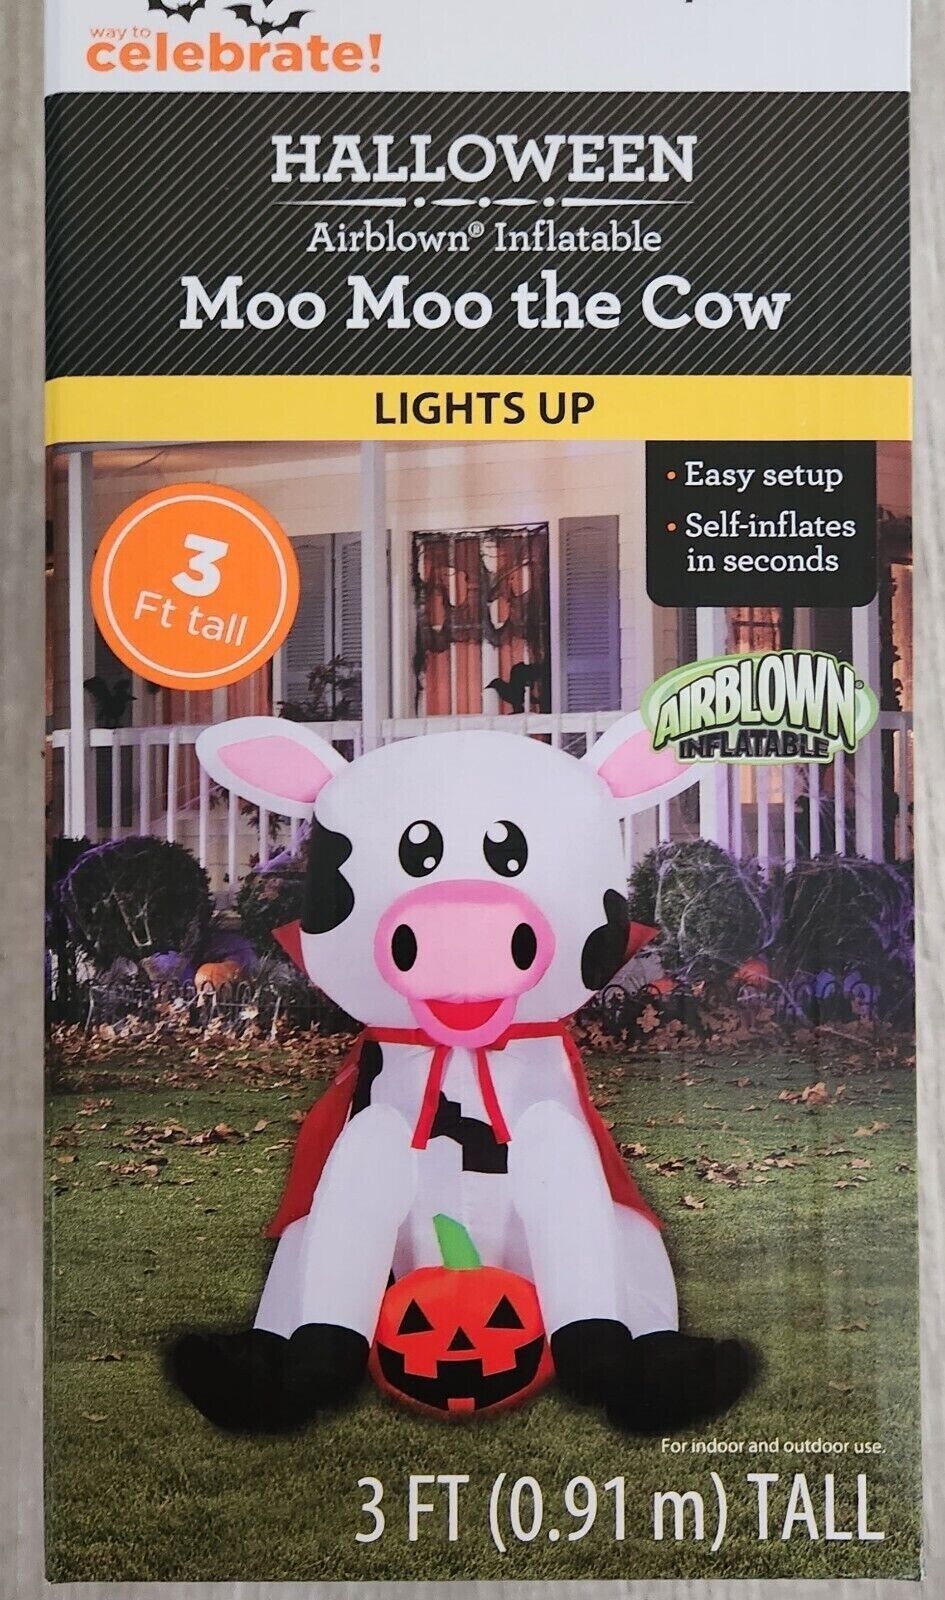 Moo Moo the Cow 3 Ft. Tall Halloween Airblown Inflatable Lights Up *New In Box*